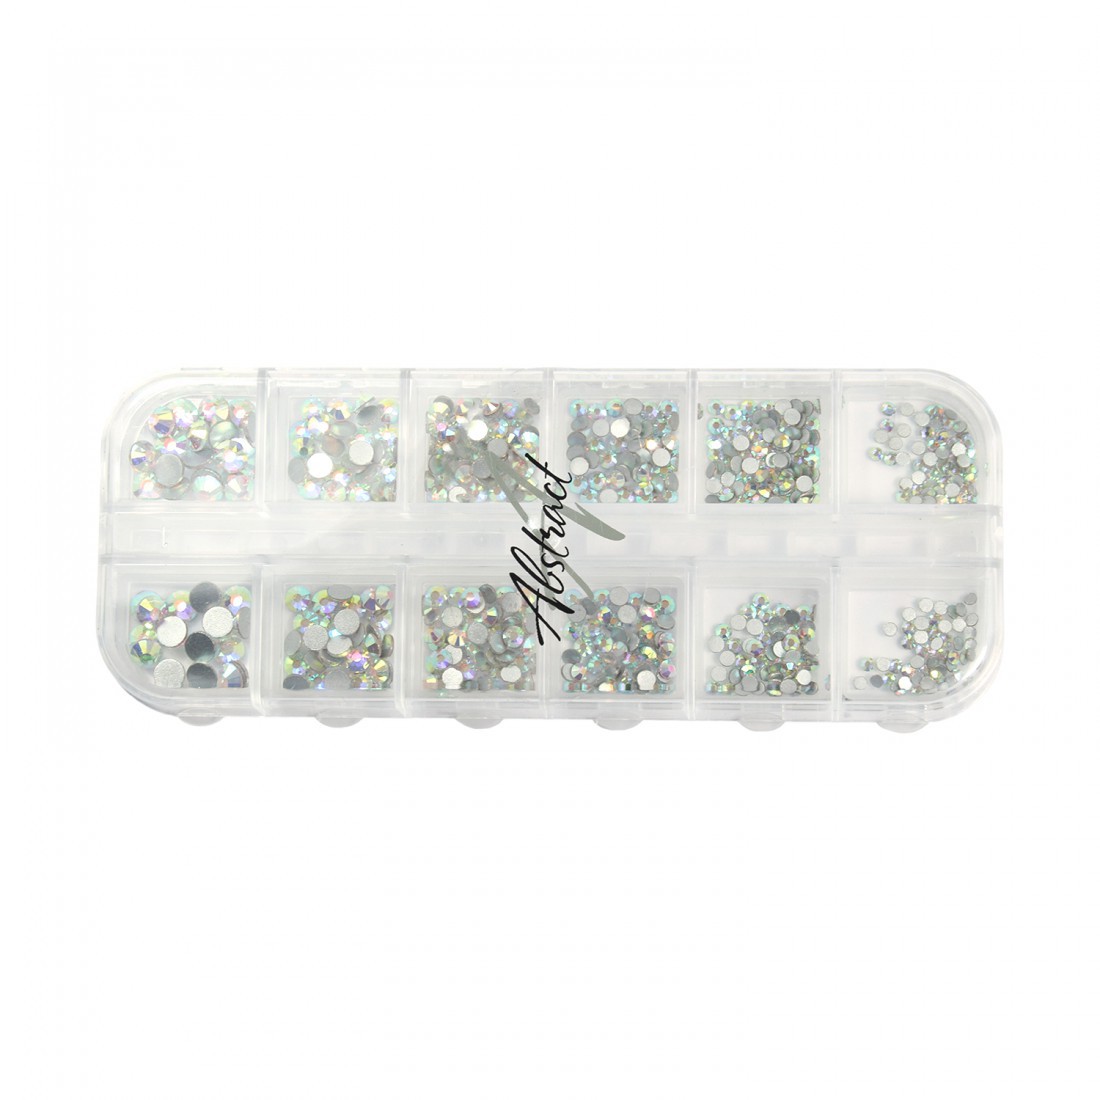 SILVER AB luxe tray premium